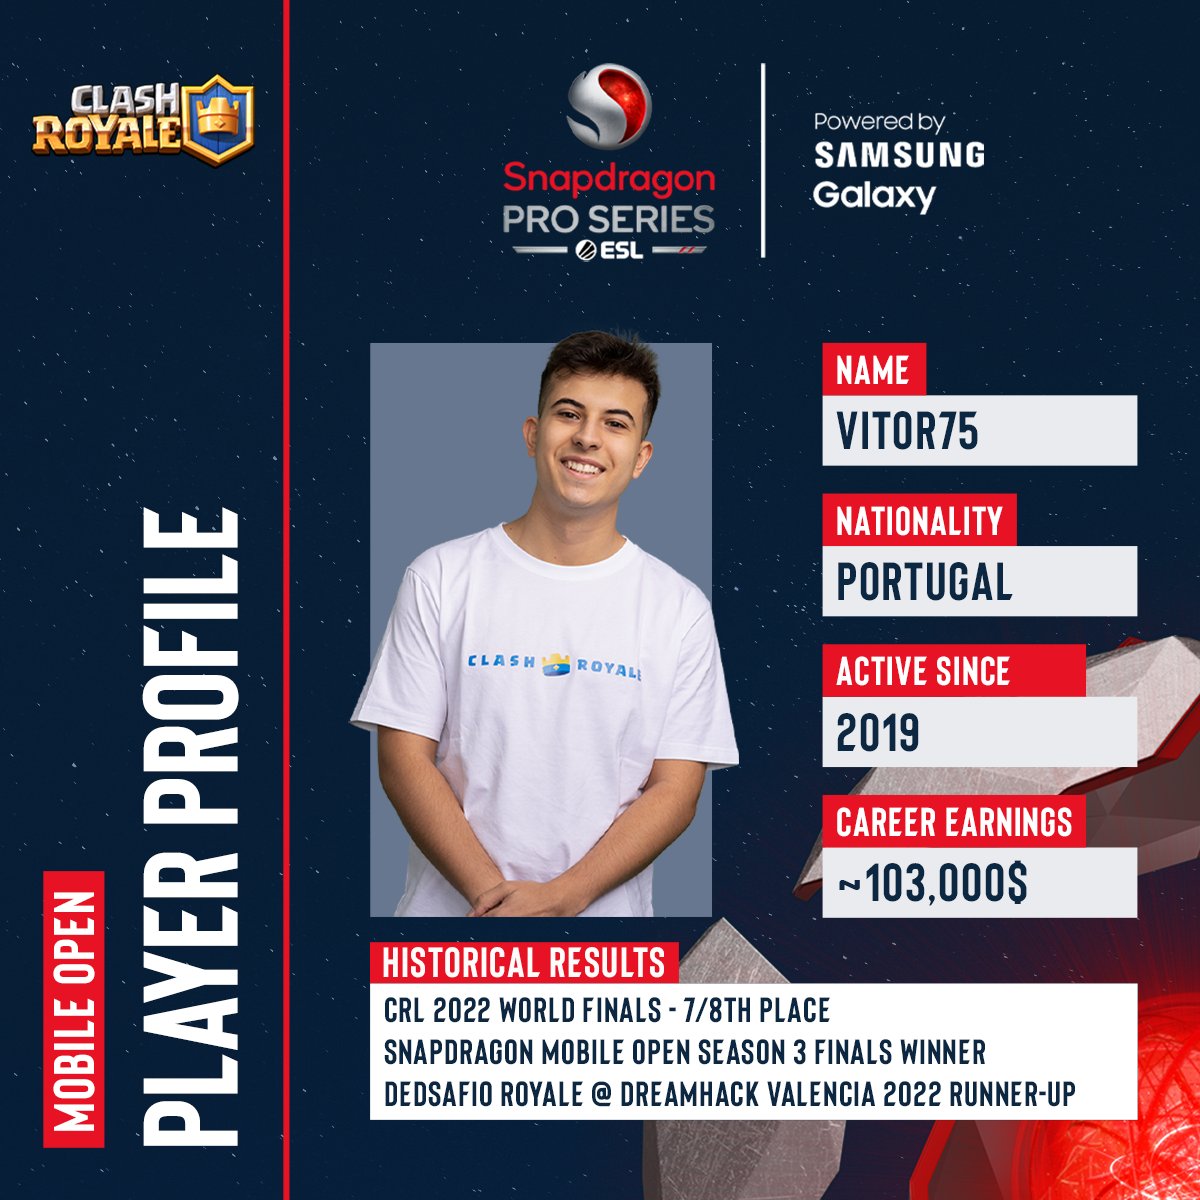 A World Finals regular, @Vitor75u added his name to #SnapdragonProSeries roll of honour this season! 🏆 @EsportsRoyaleEN